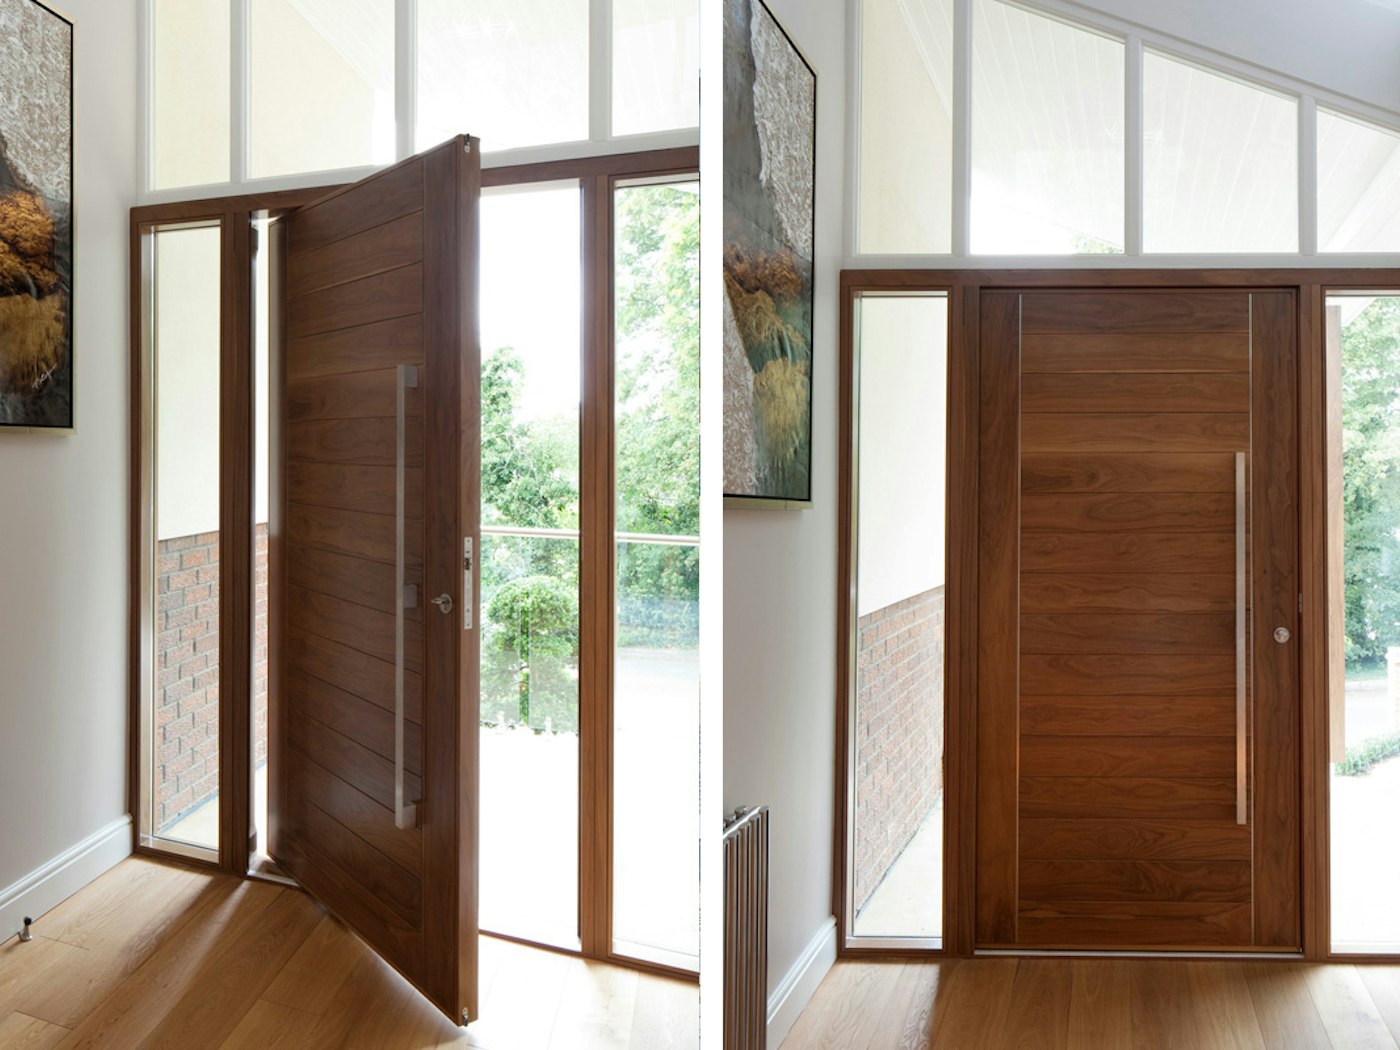 Oslo E80 Pivot front door in American Black Walnut with Option 11